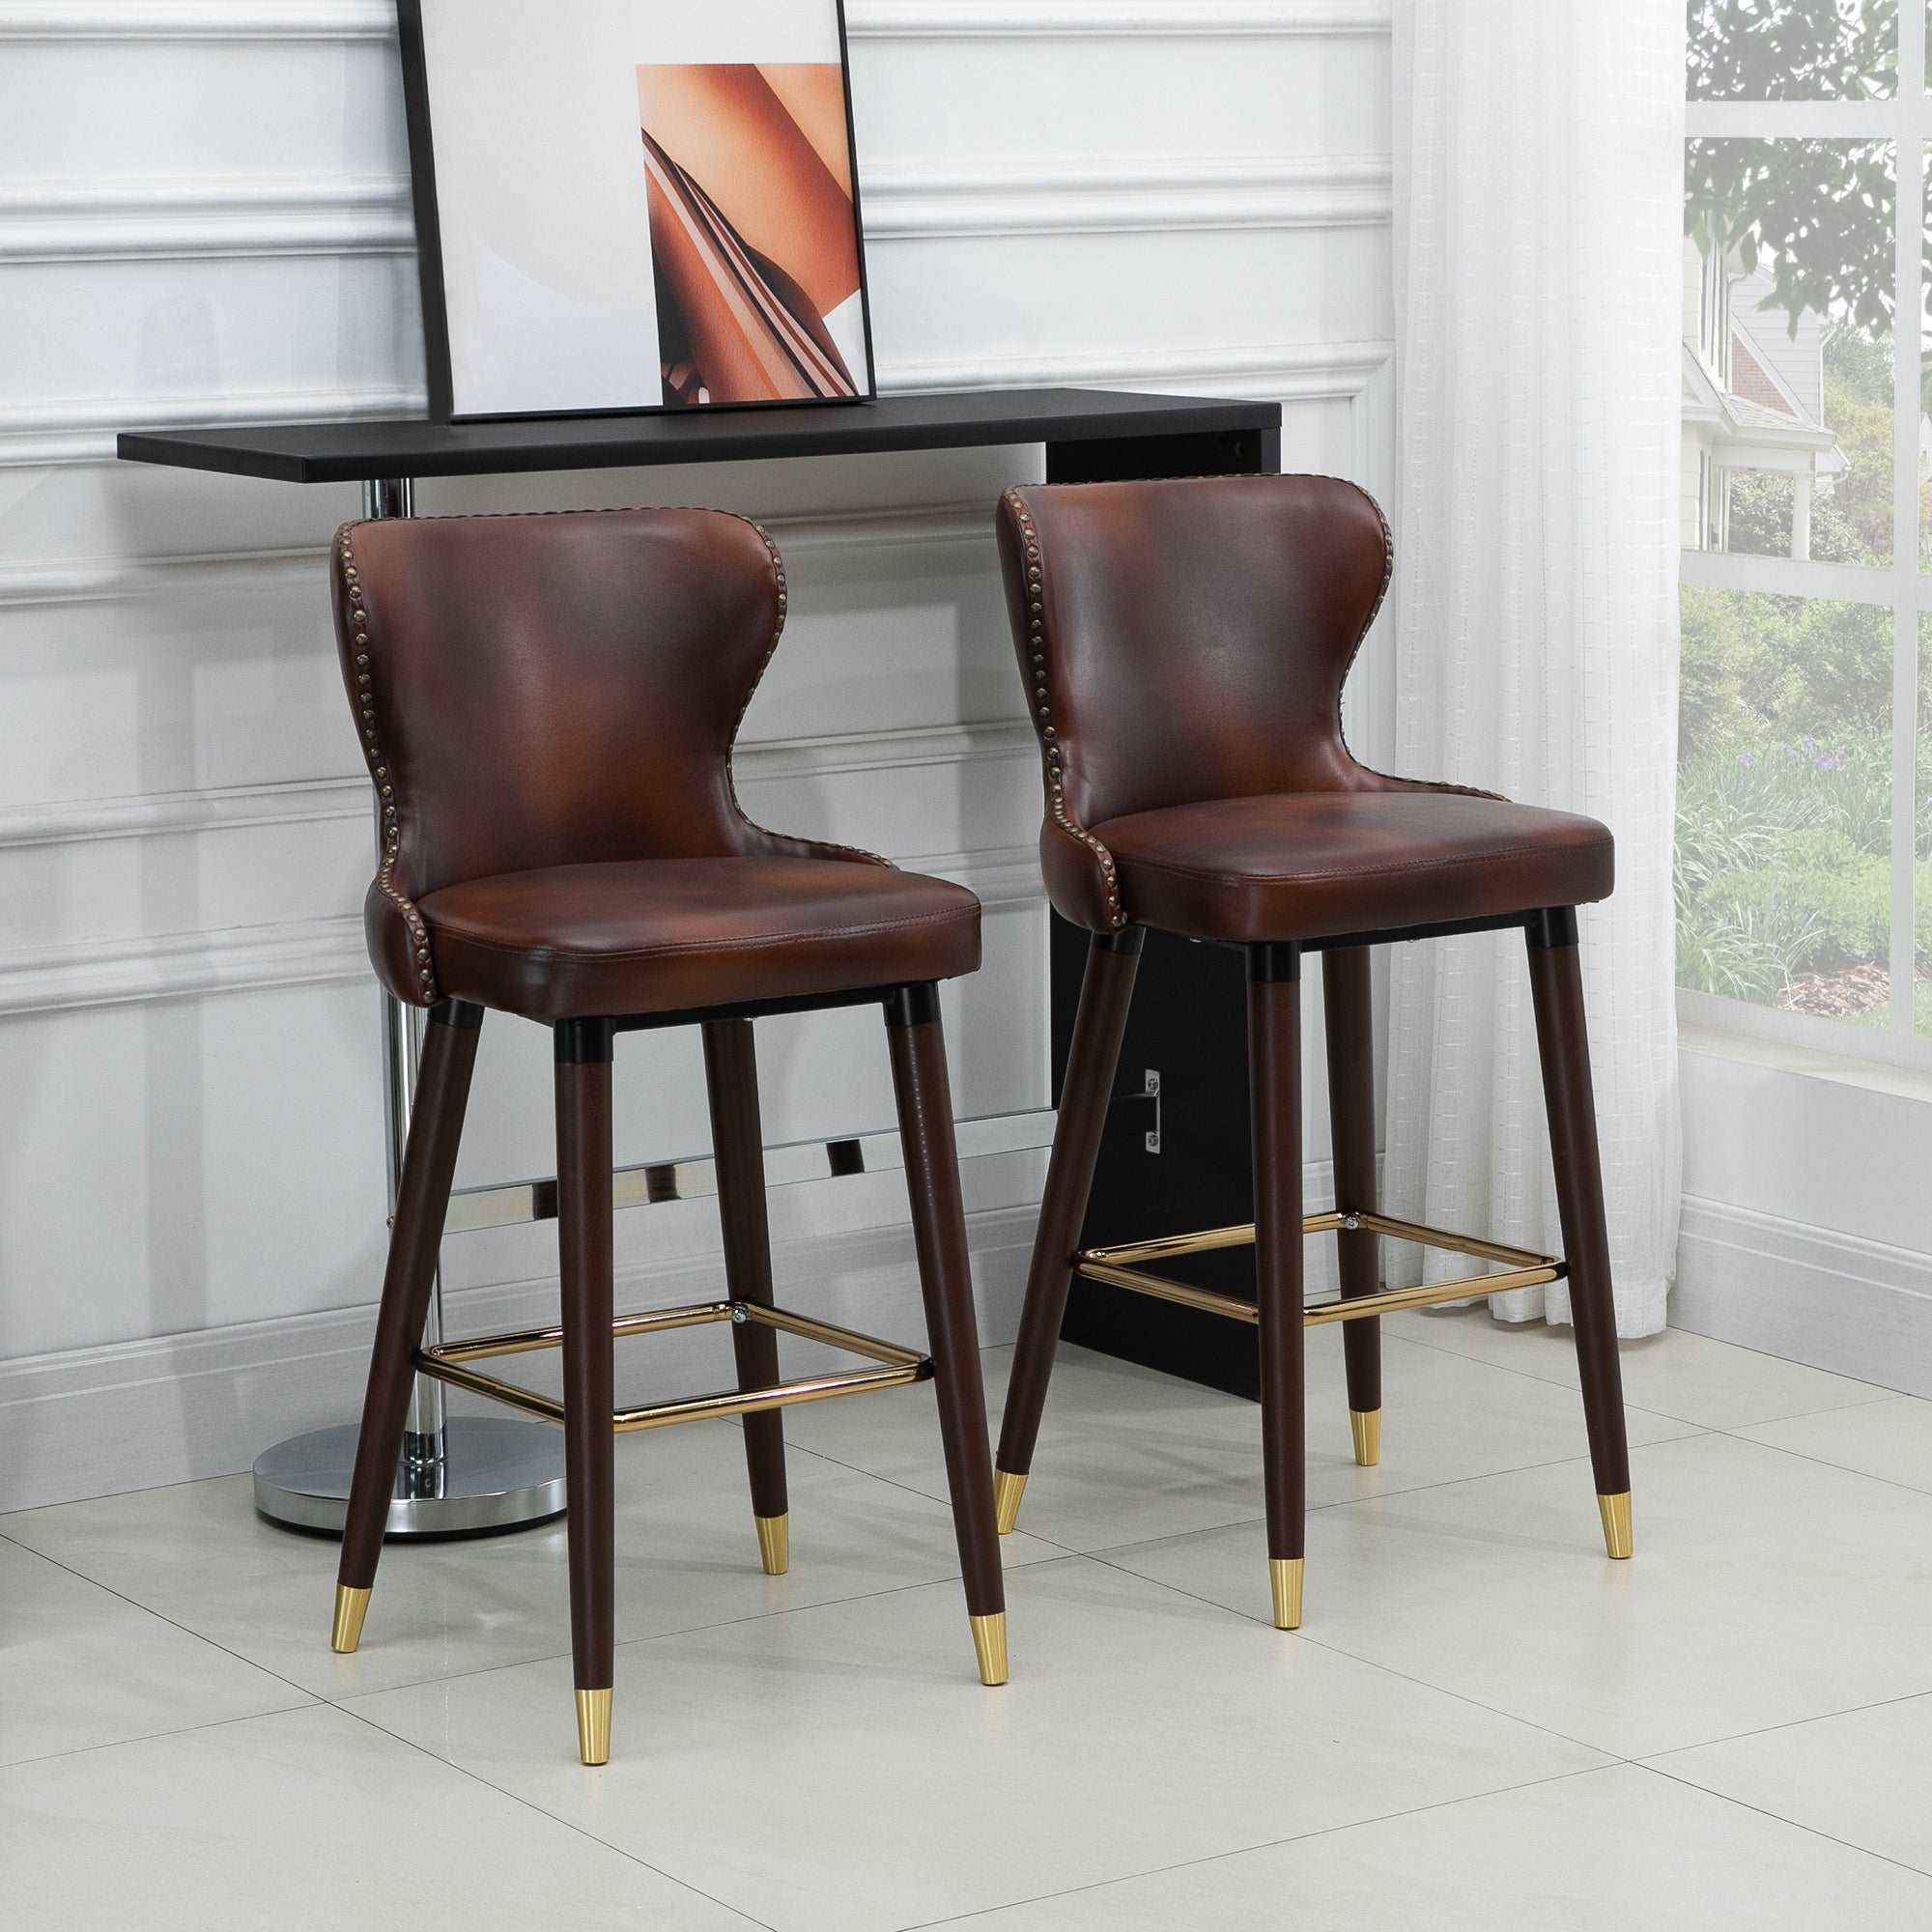 Bar Stools Set of 2, PU Leather Vintage Counter-Height Bar Chair, Luxury European Style Kitchen Stools with Back, Brown  AOSOM   